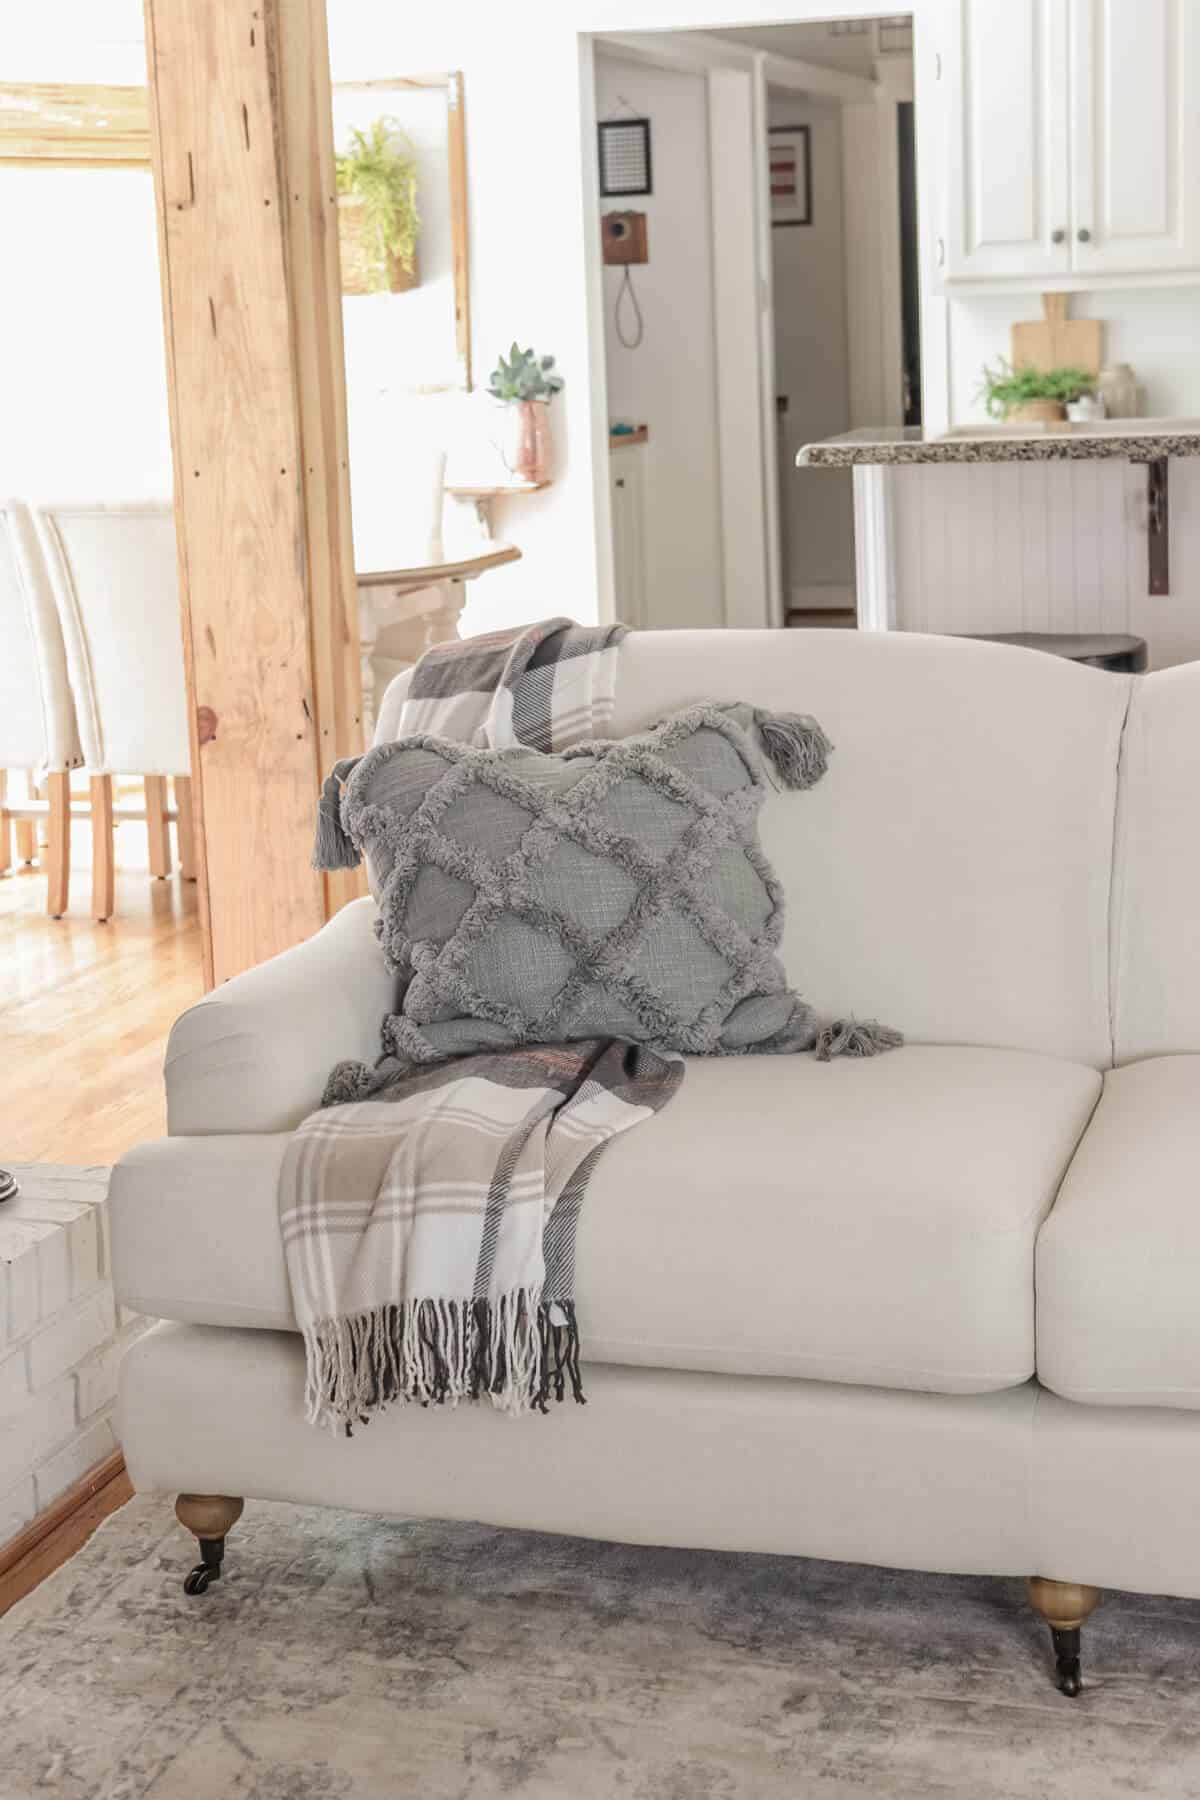 gray pillow with plaid throw

18 Quick and Easy Tips to Refresh Your Living Room